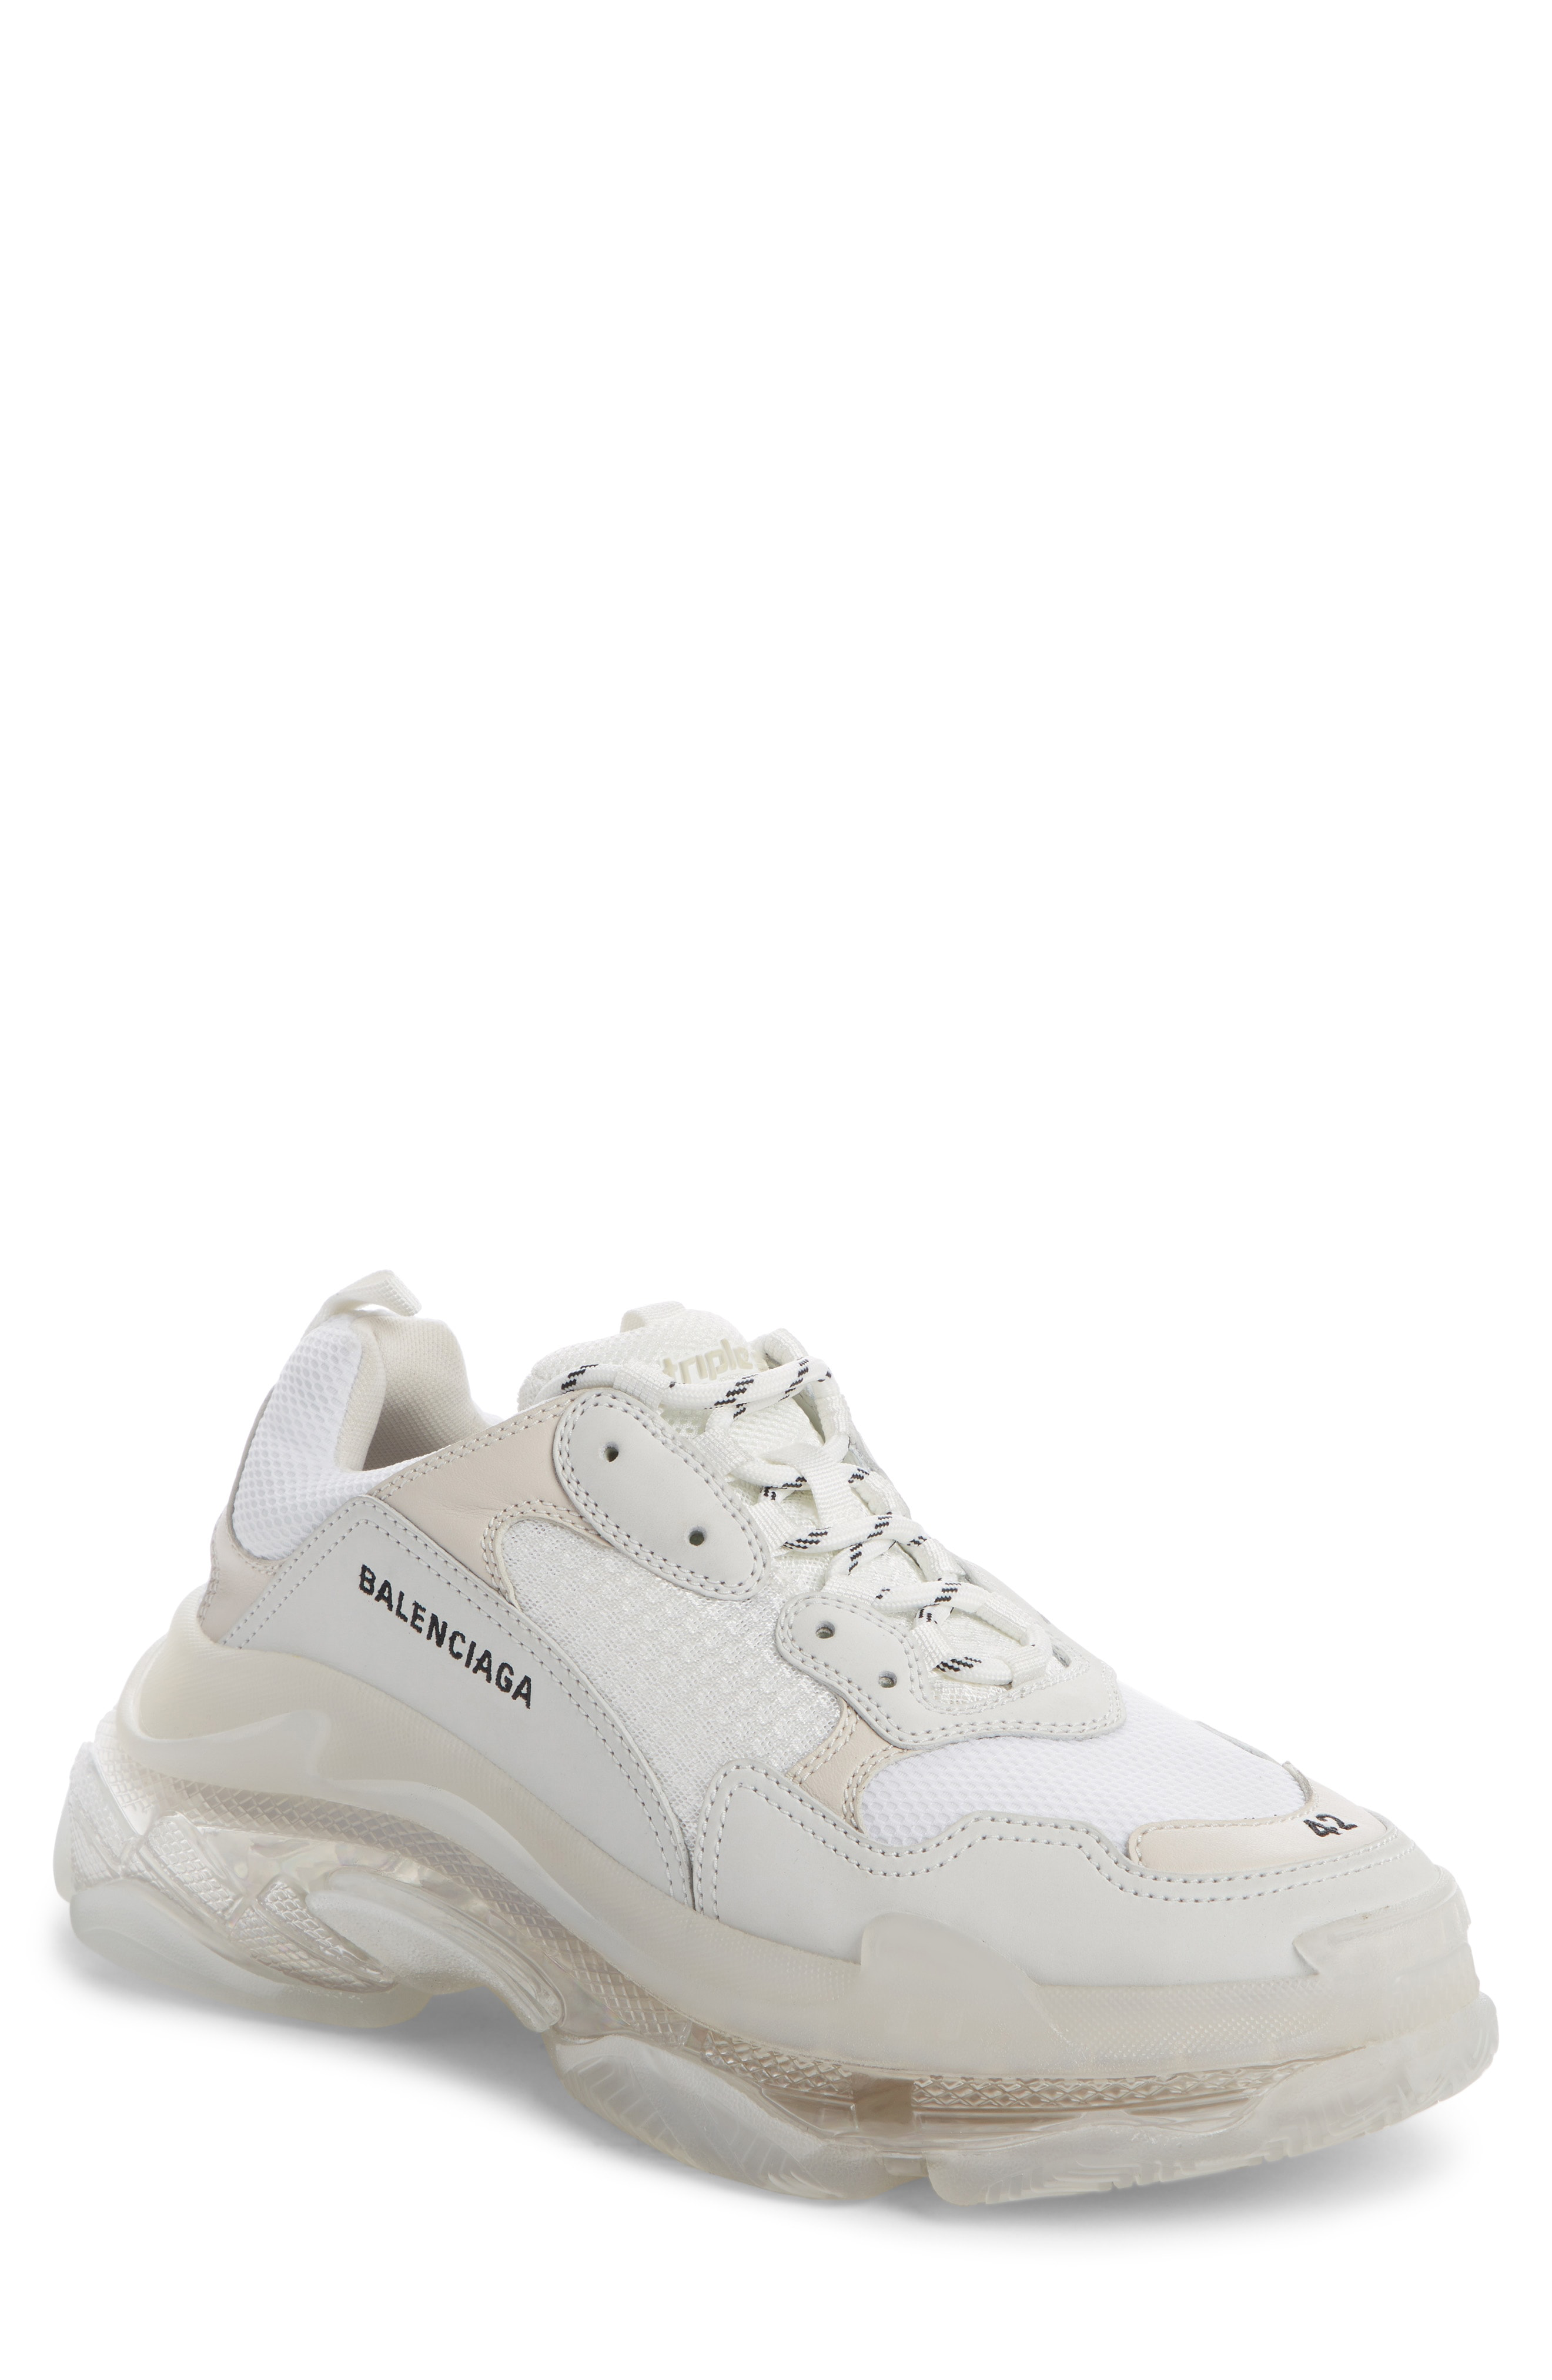 How to get Balenciaga Triple S Trainers White in 2019